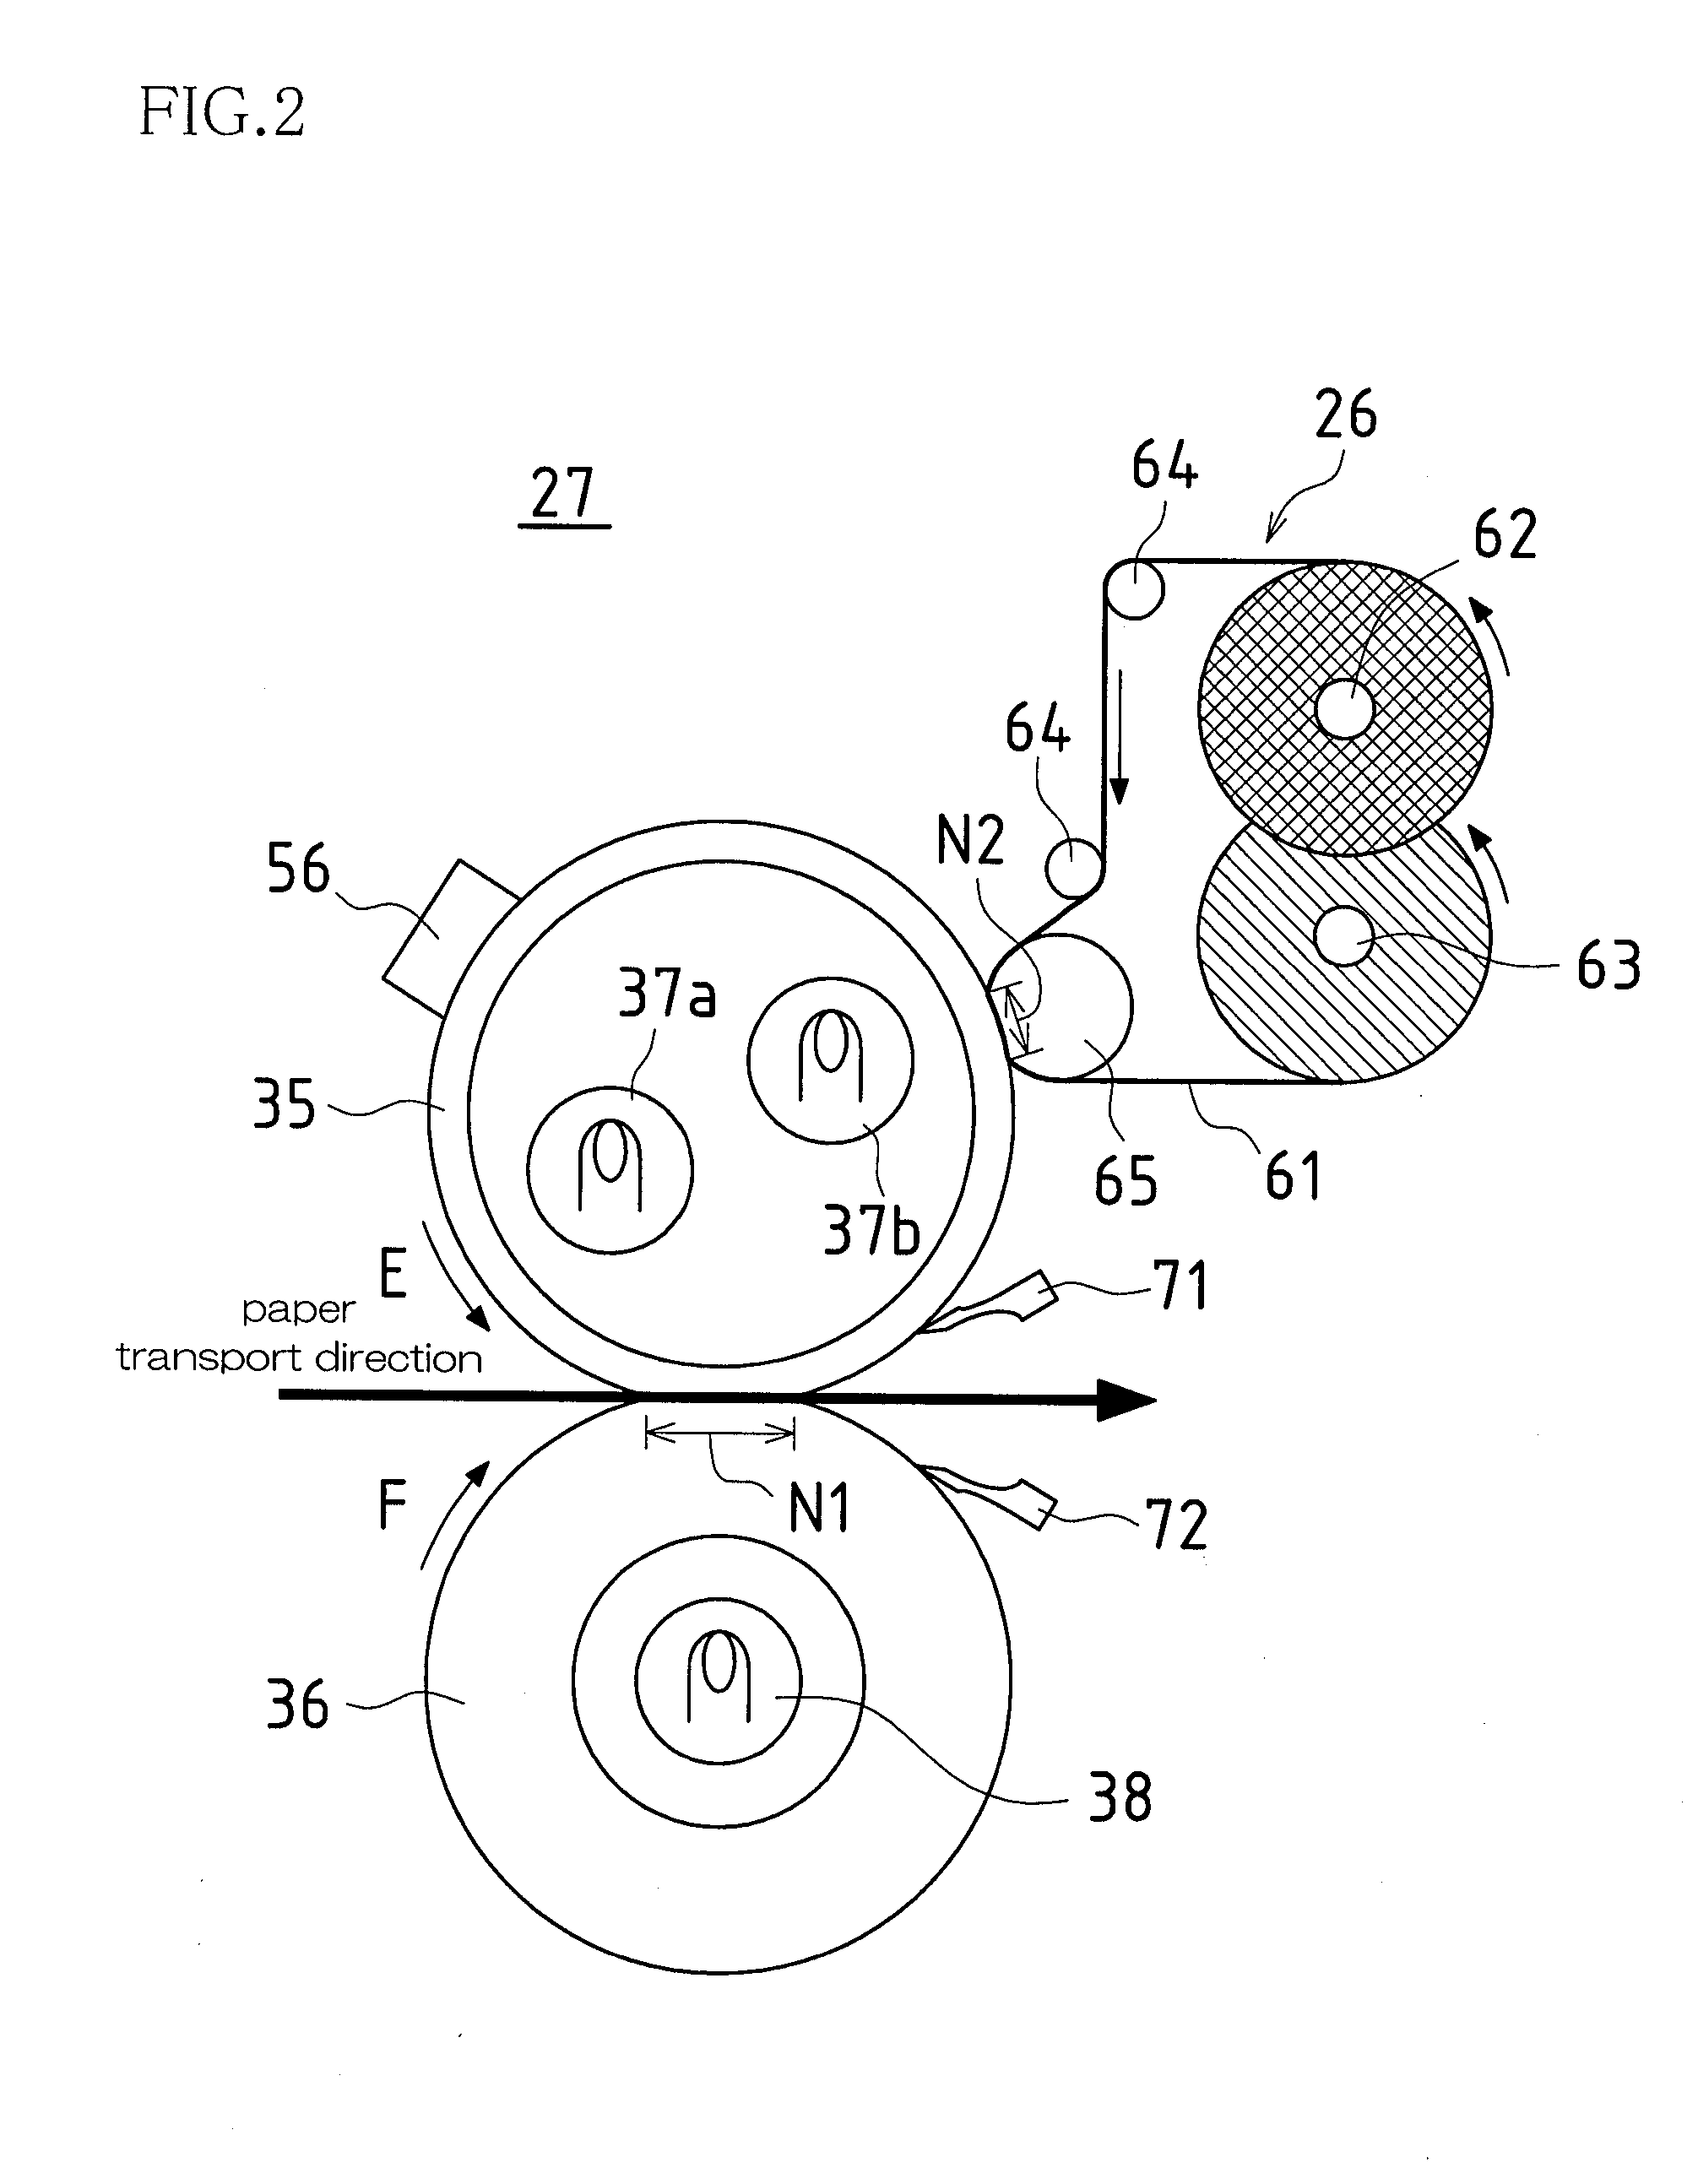 Roller drive control method for fixing apparatus